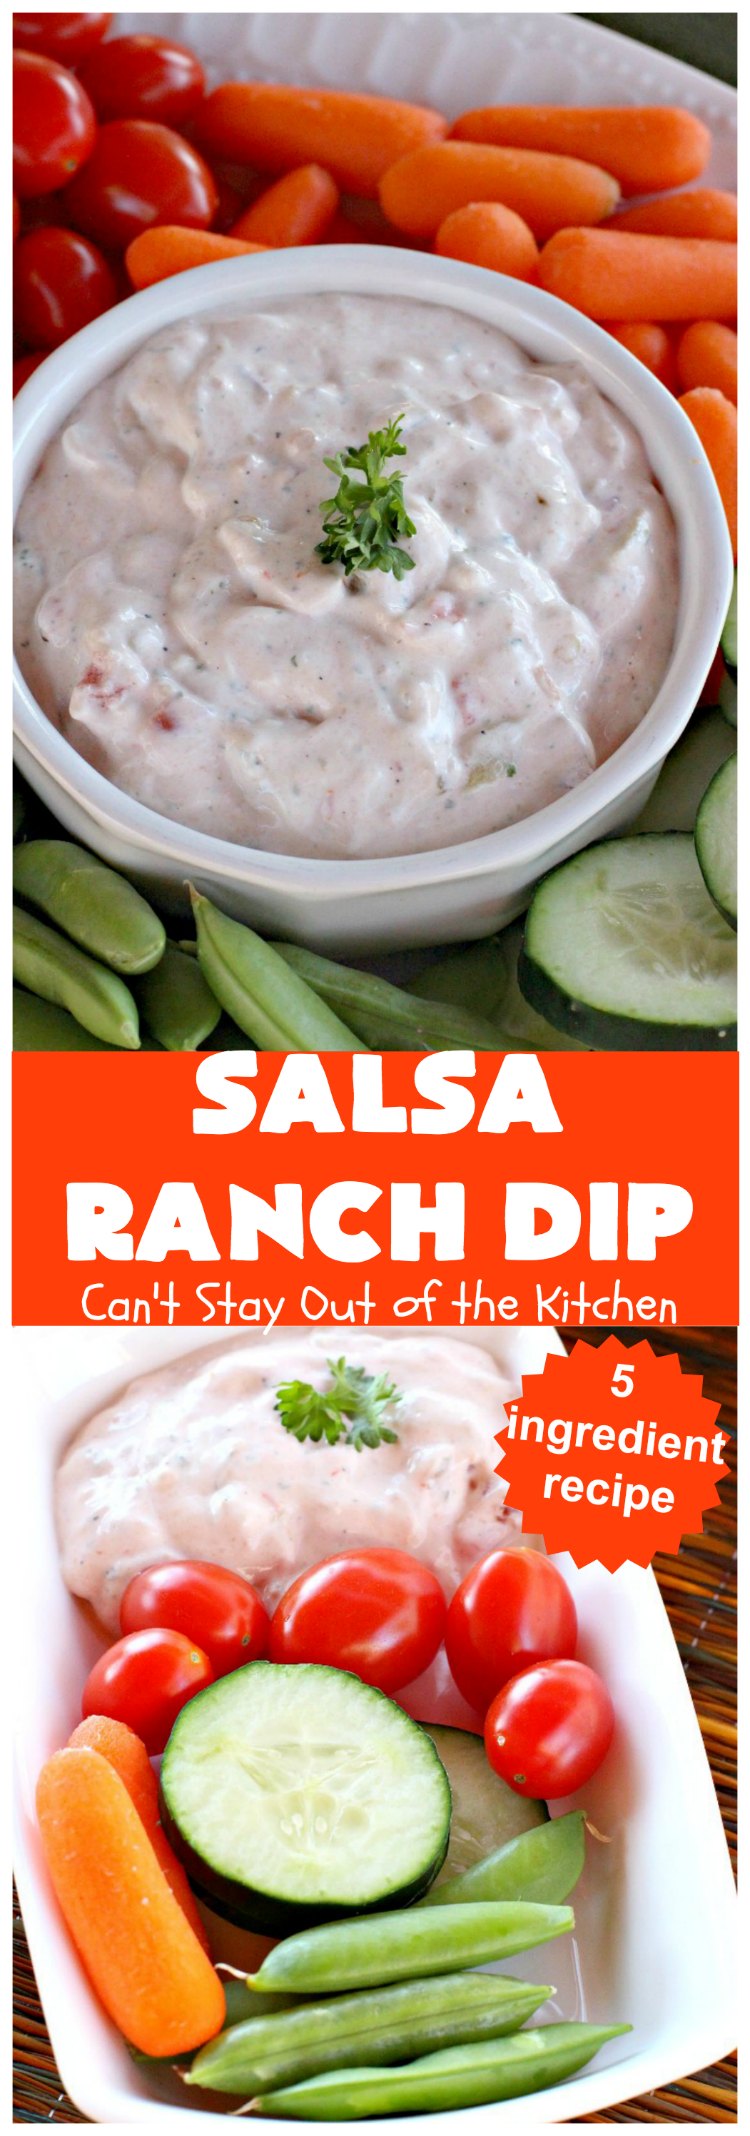 Salsa Ranch Dip | Can't Stay Out of the Kitchen